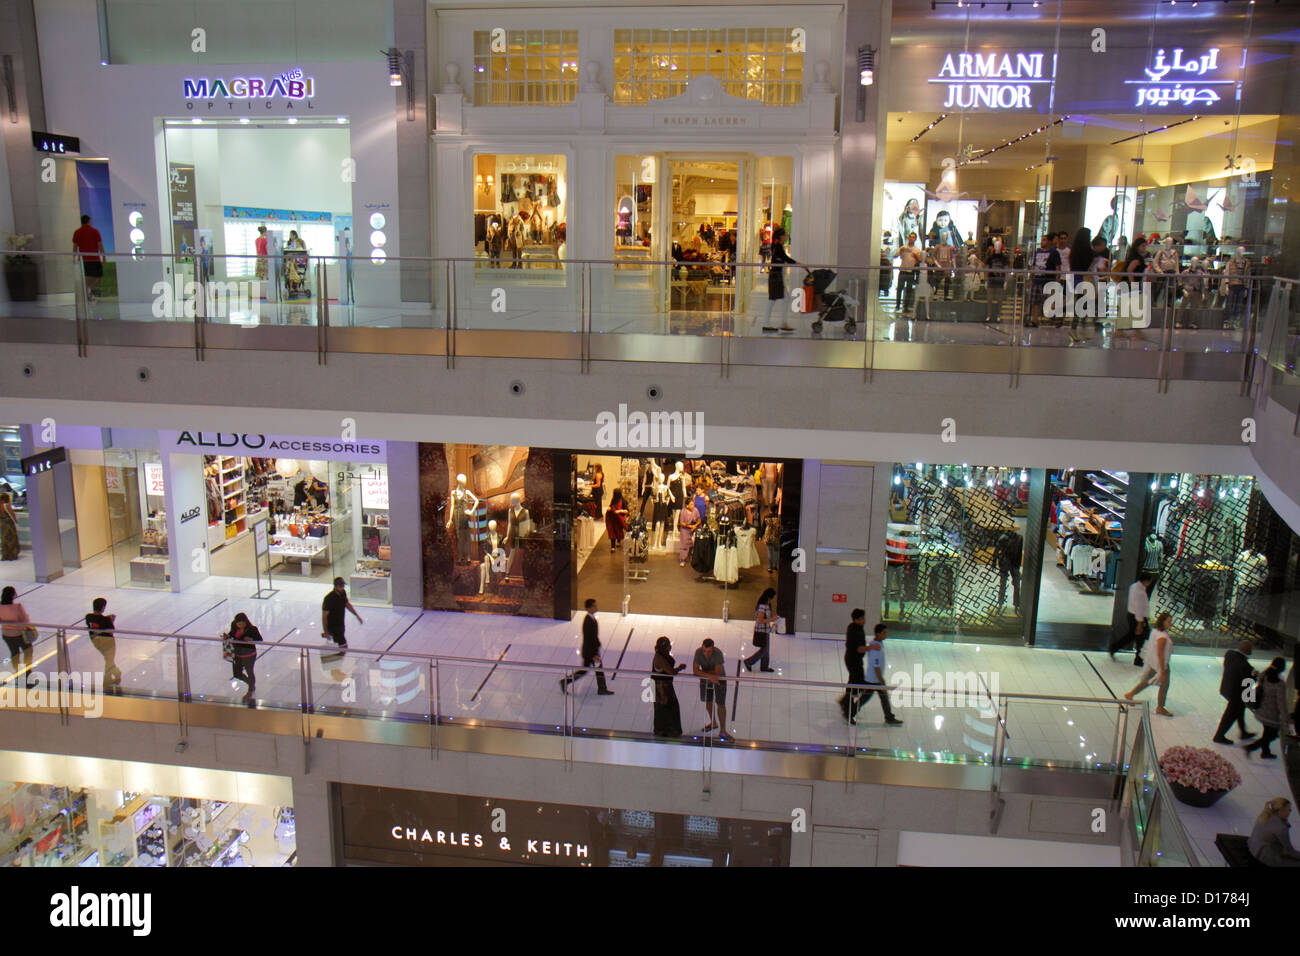 Aldo Store Front Resolution Images - Alamy